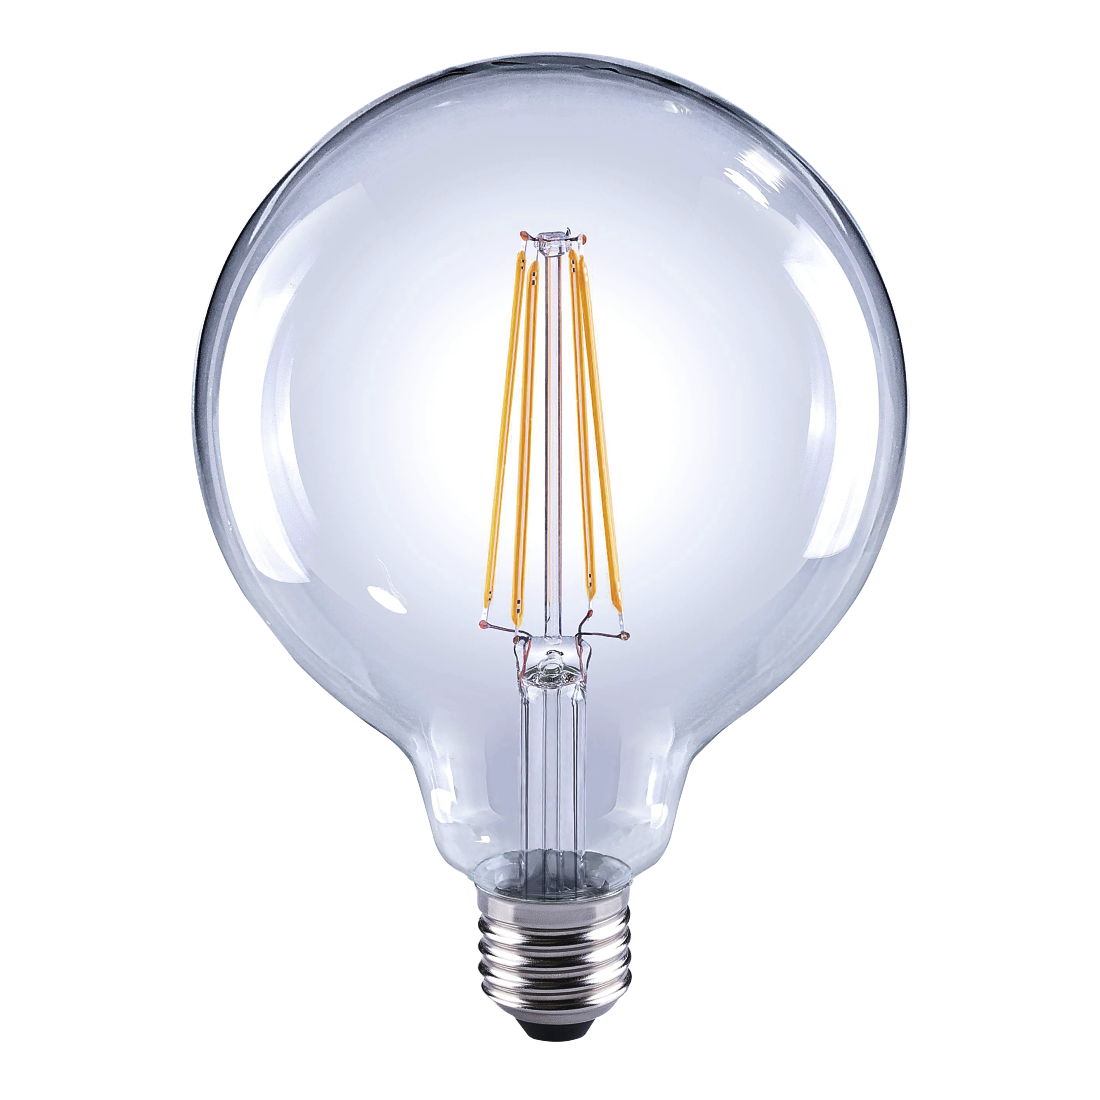 abx High-Res Image - Xavax, LED Filament, E27, 1055lm Replaces 75W Globe Bulb, warm white, dimmable